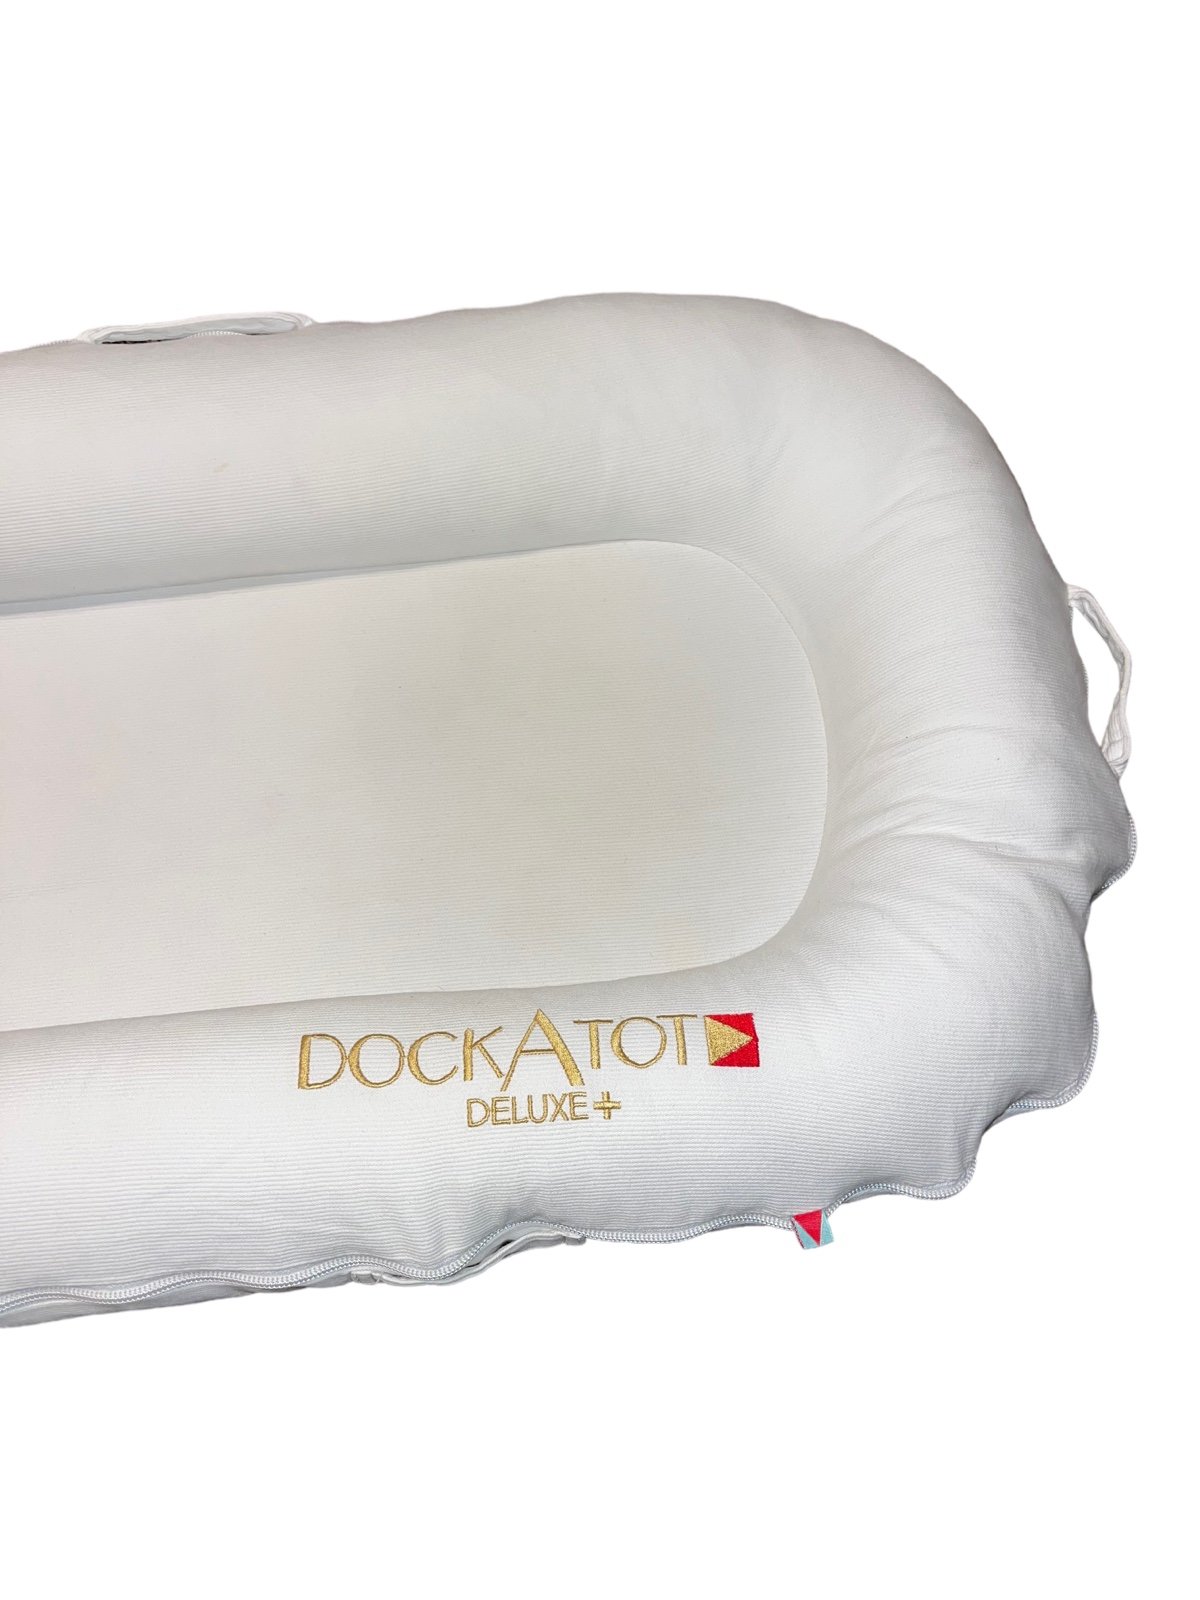 Dock a Tot Deluxe + Preowned Good Condition Infant Bed Lounger White g6fN7Llrd